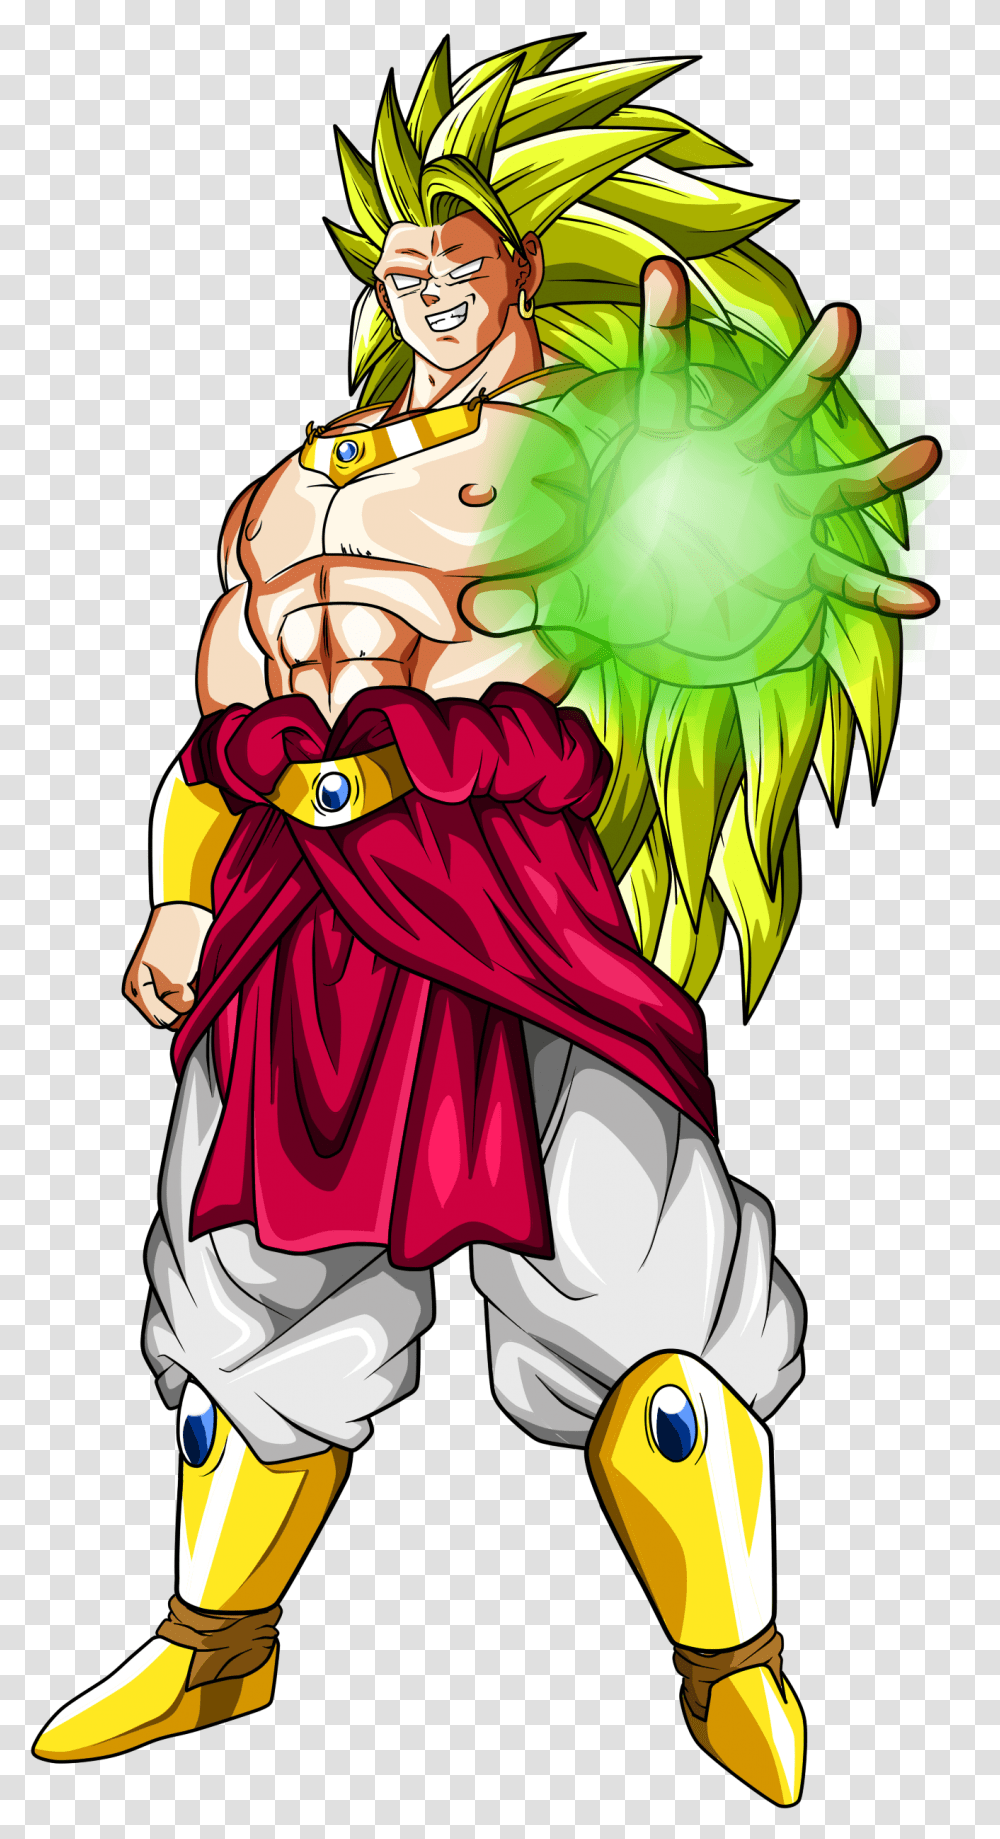 Library Of Broly Clip Art Black And Dragon Ball Z Broly, Clothing, Apparel, Comics, Book Transparent Png